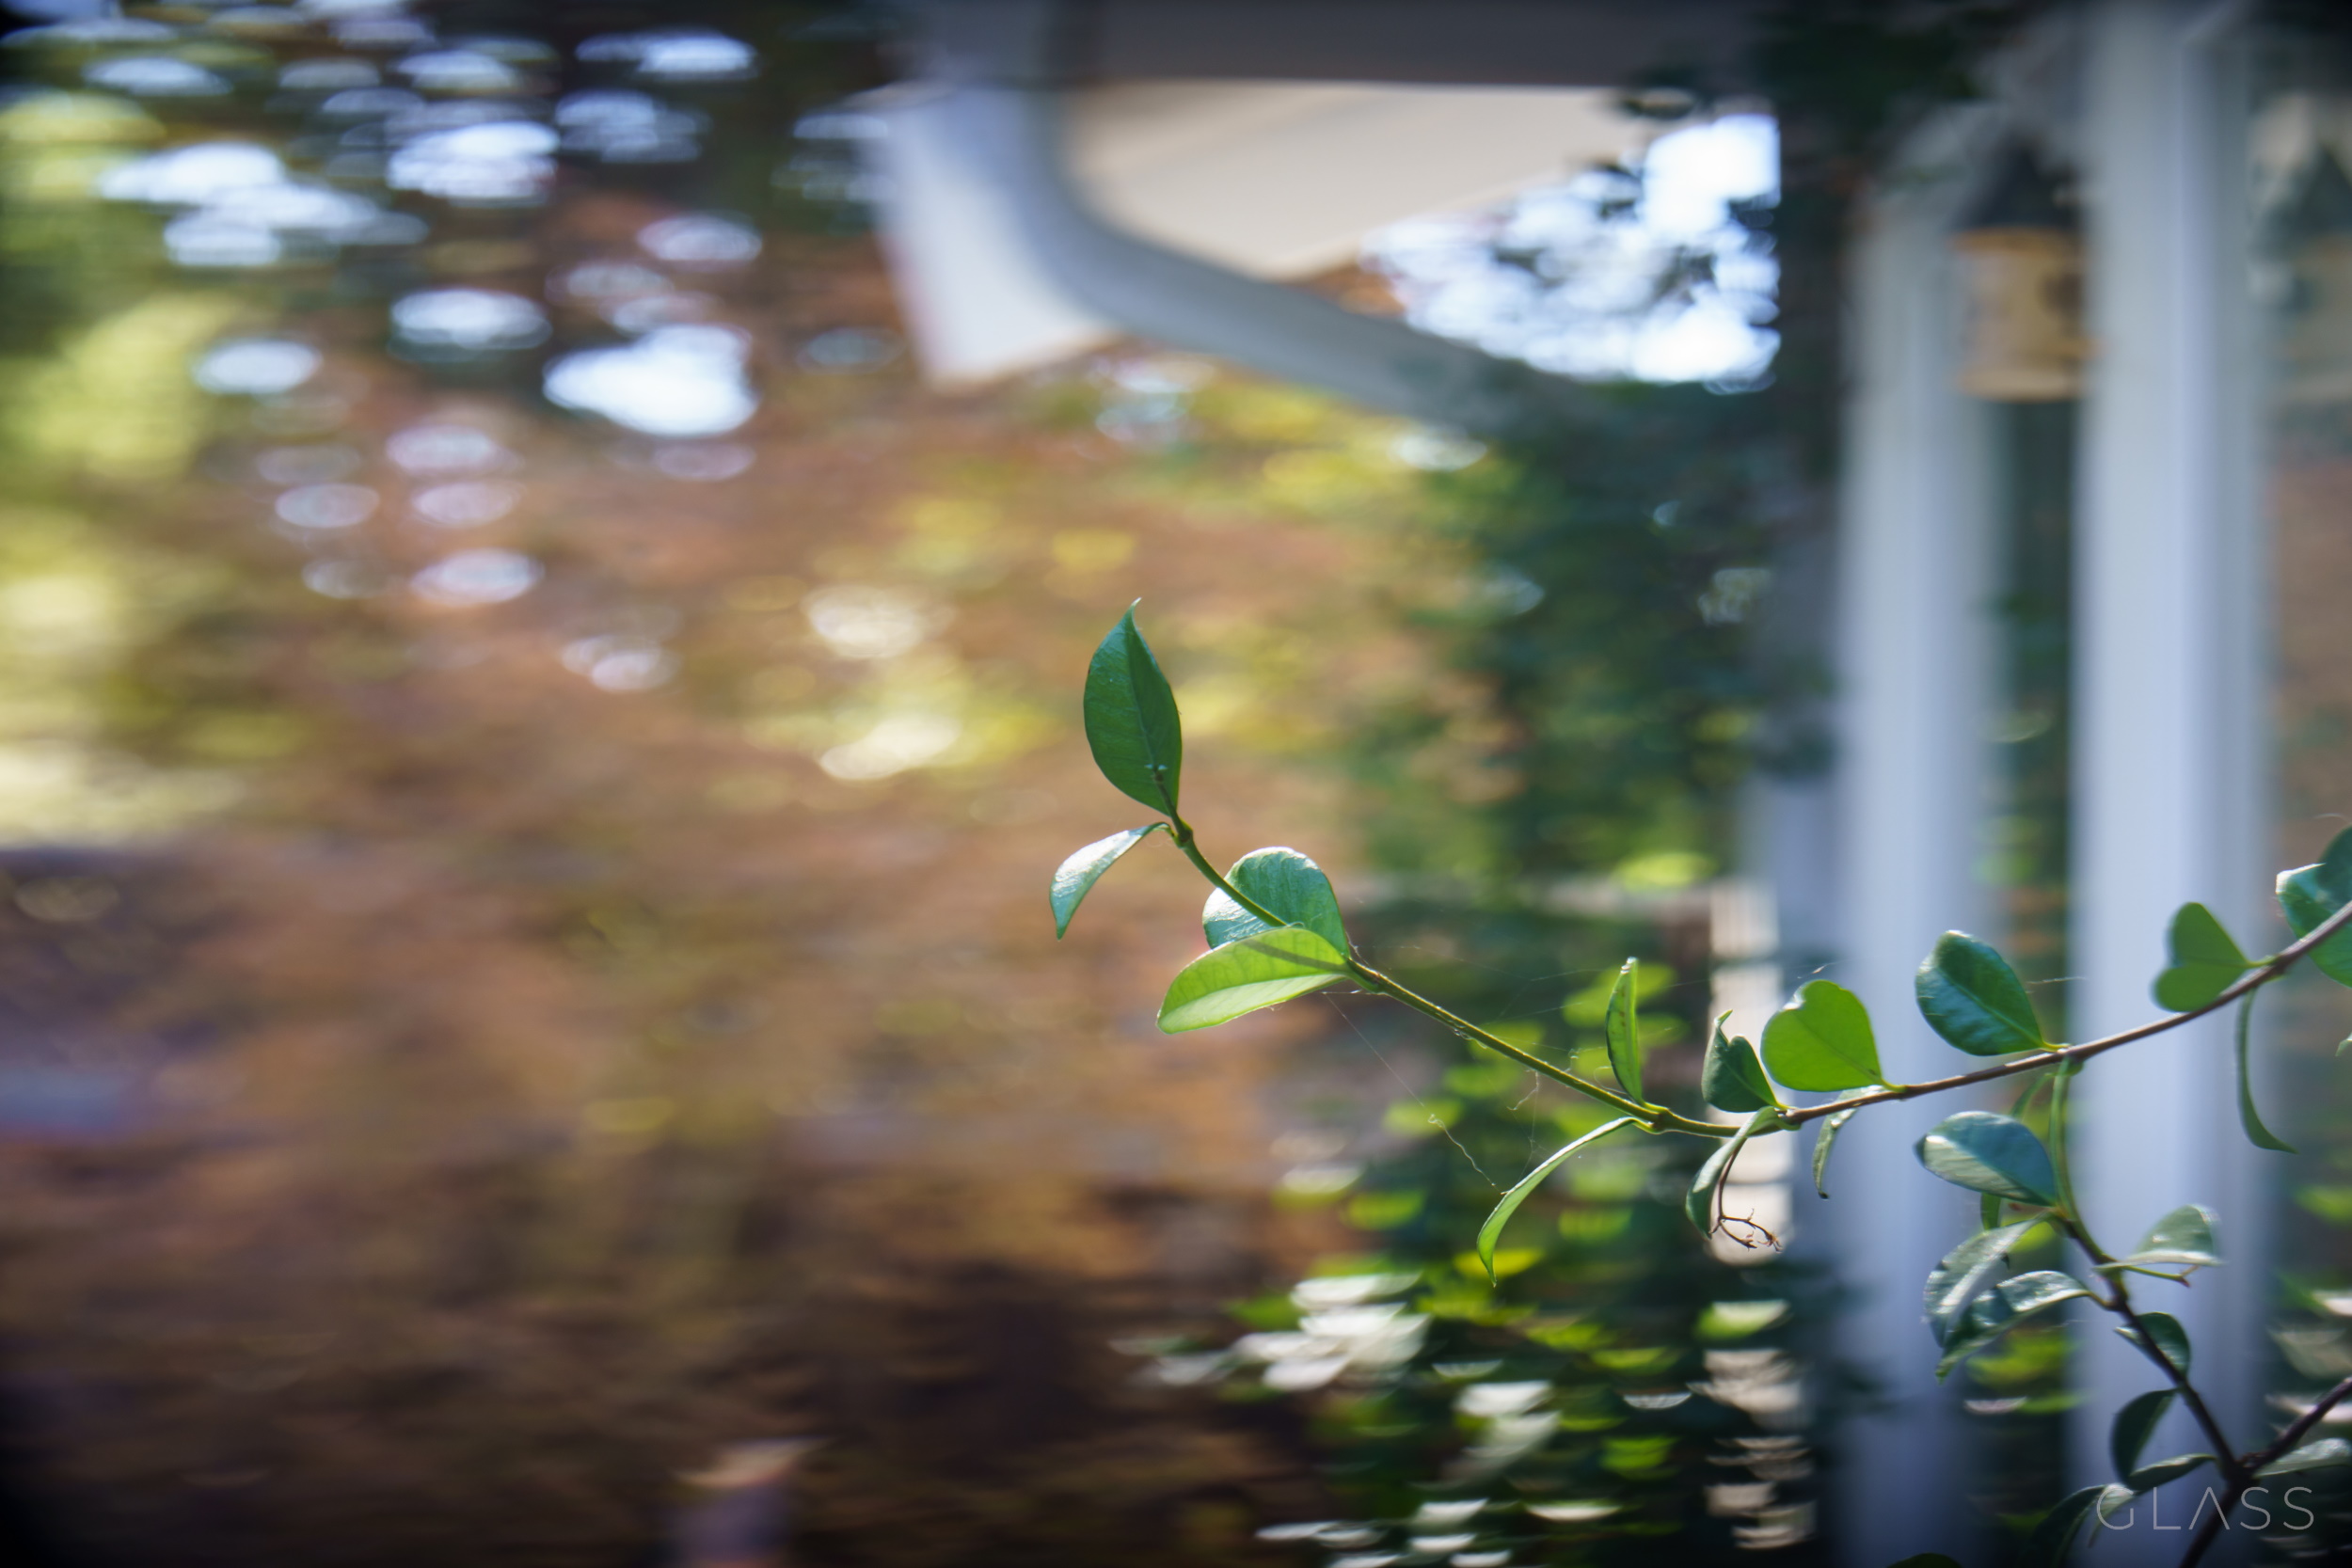 Example image showing background blur behind a plant stem.